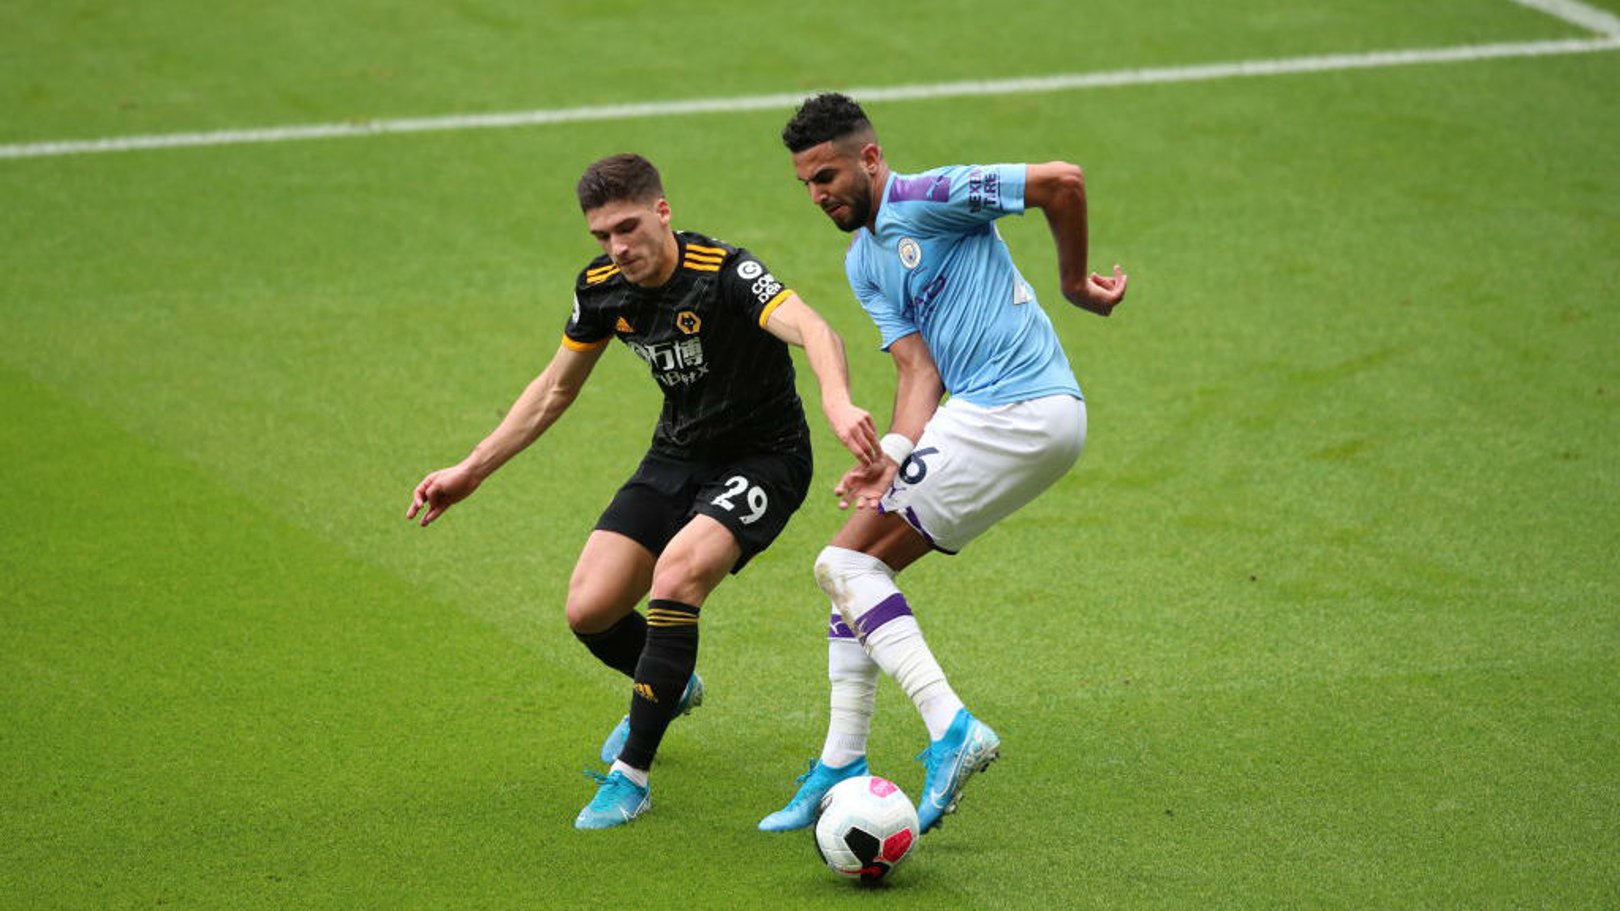 Watch Wolves v City on Amazon Prime